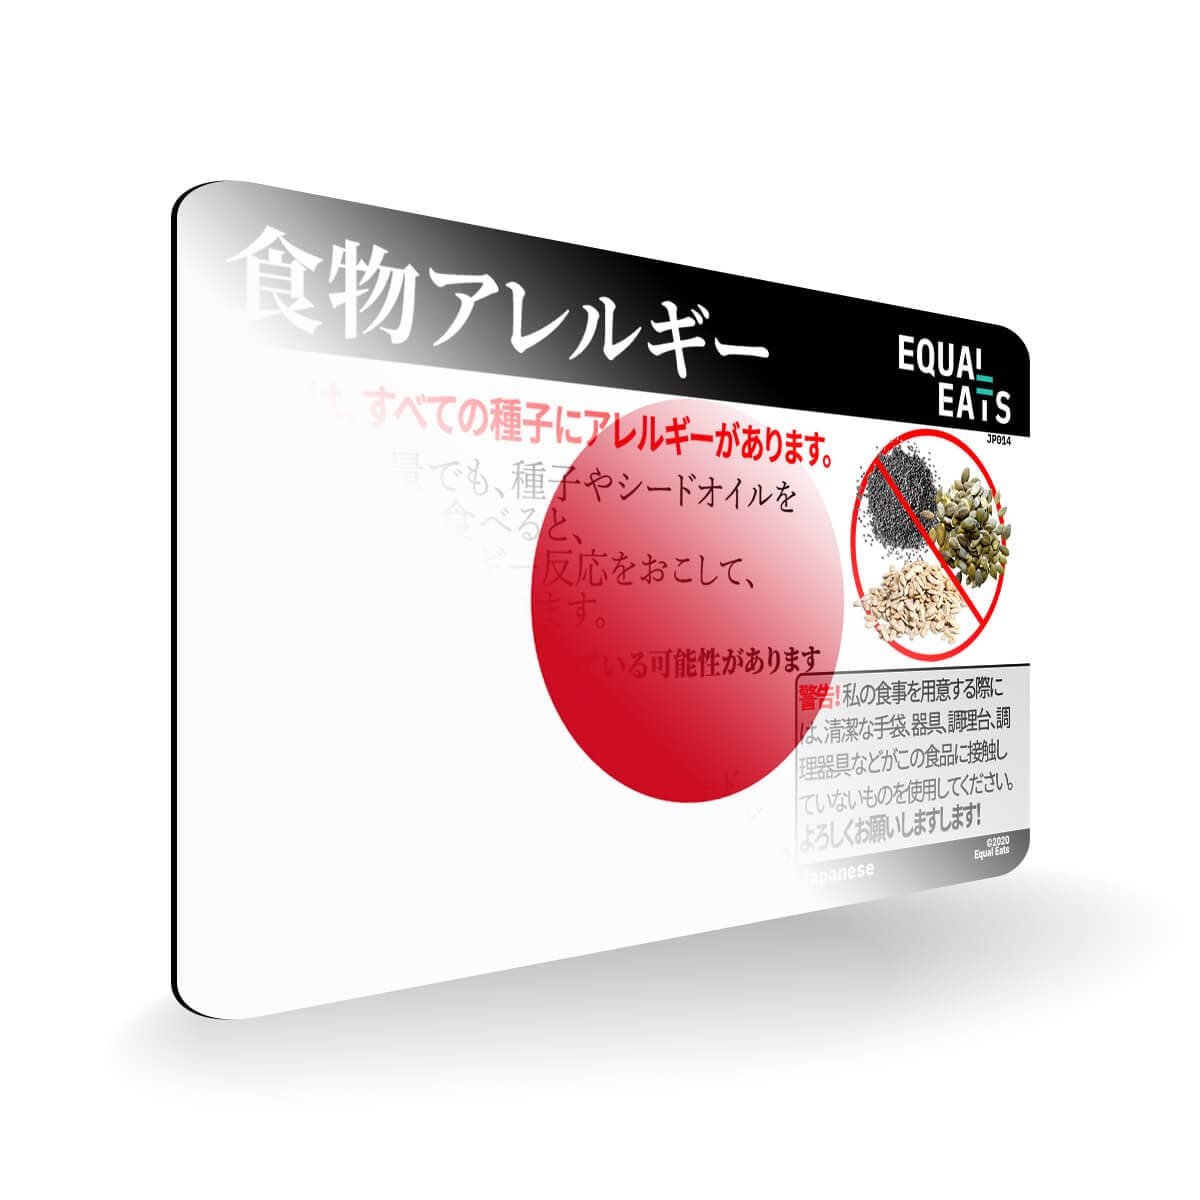 Seed Allergy in Japanese. Seed Allergy Card for Japan